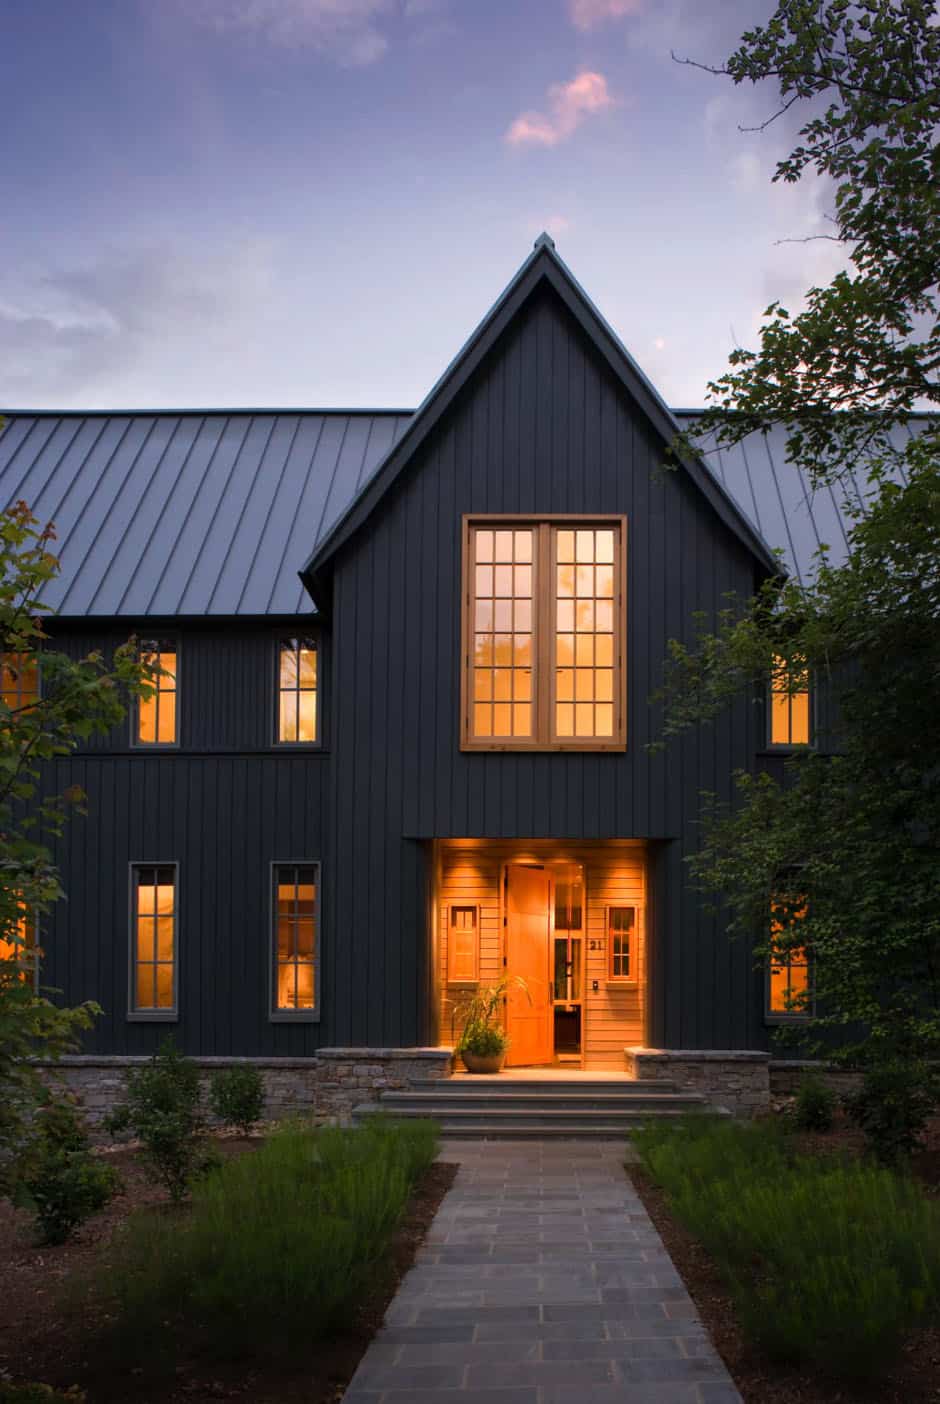 Tour this ultra-dreamy modern rustic house loaded with warmth in Asheville